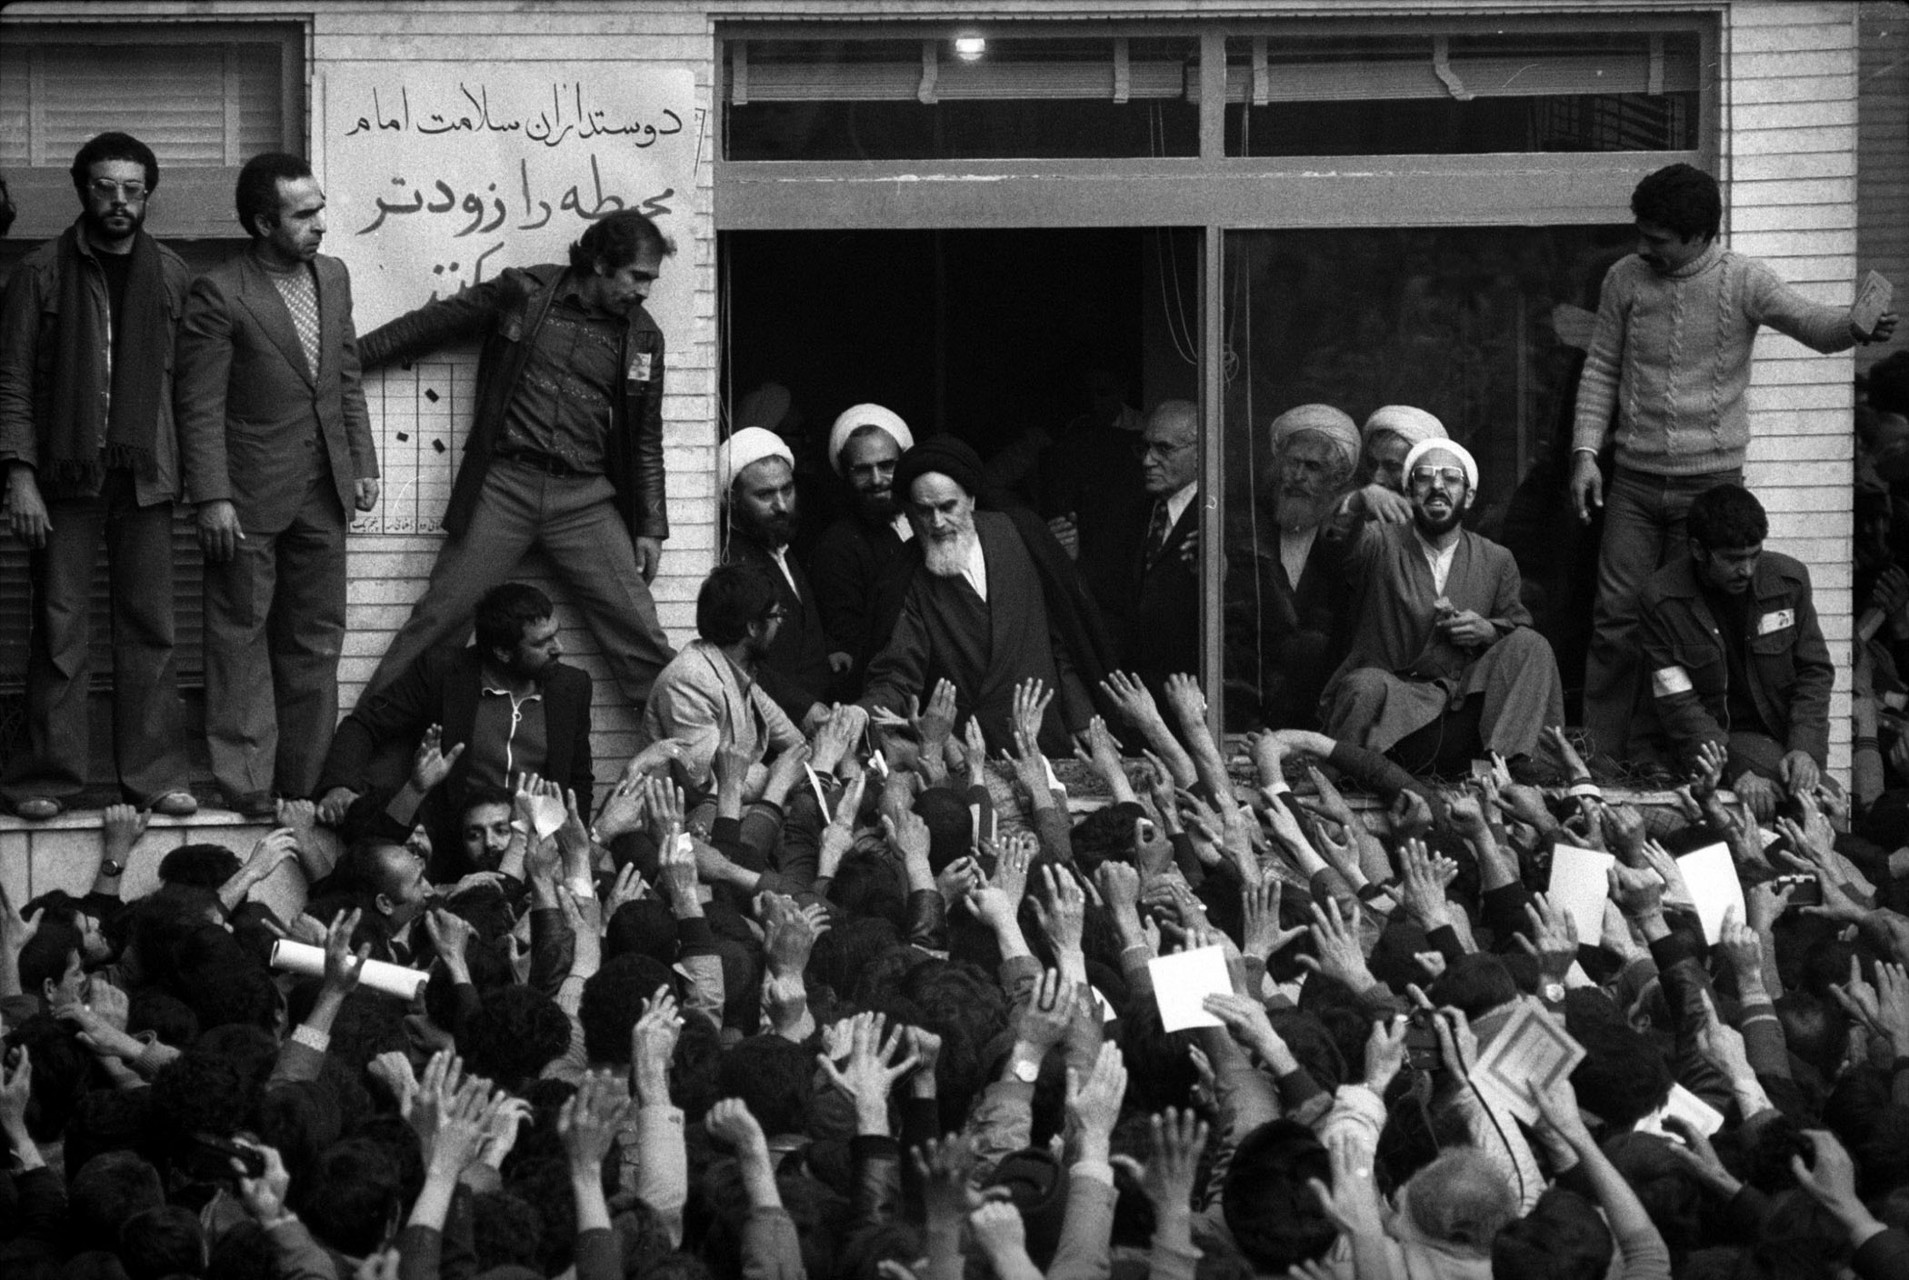 Ayatollah Khomeini salutes the crowds from his small school room office.